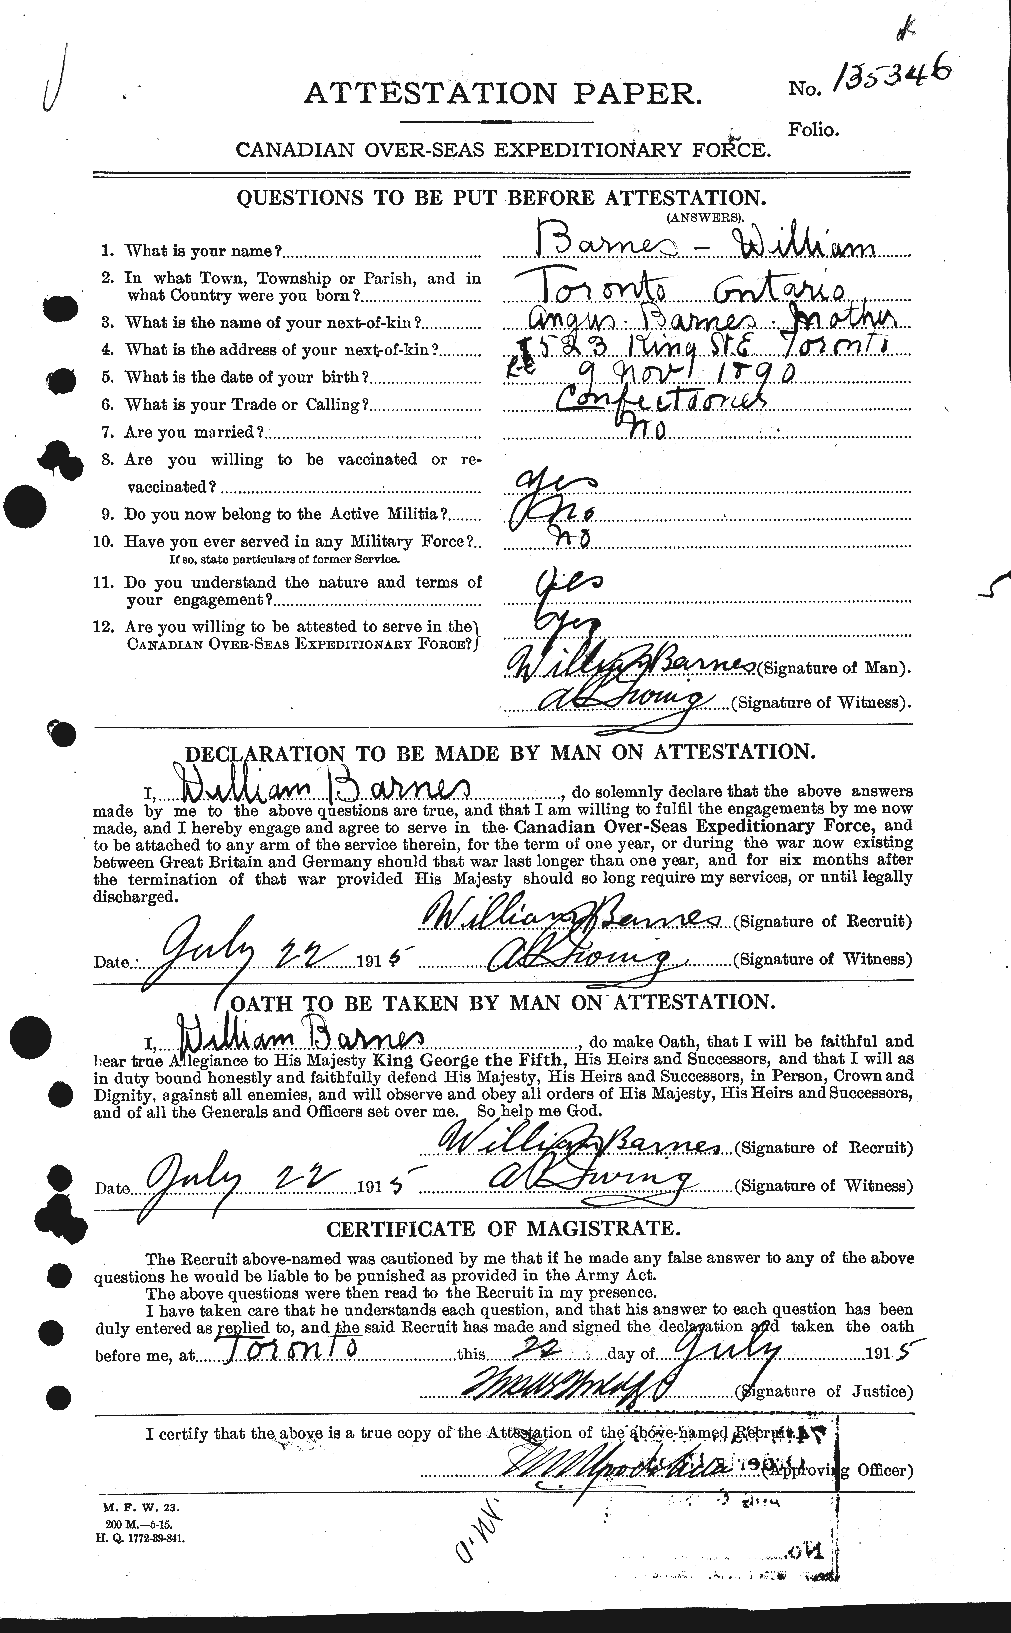 Personnel Records of the First World War - CEF 227313a